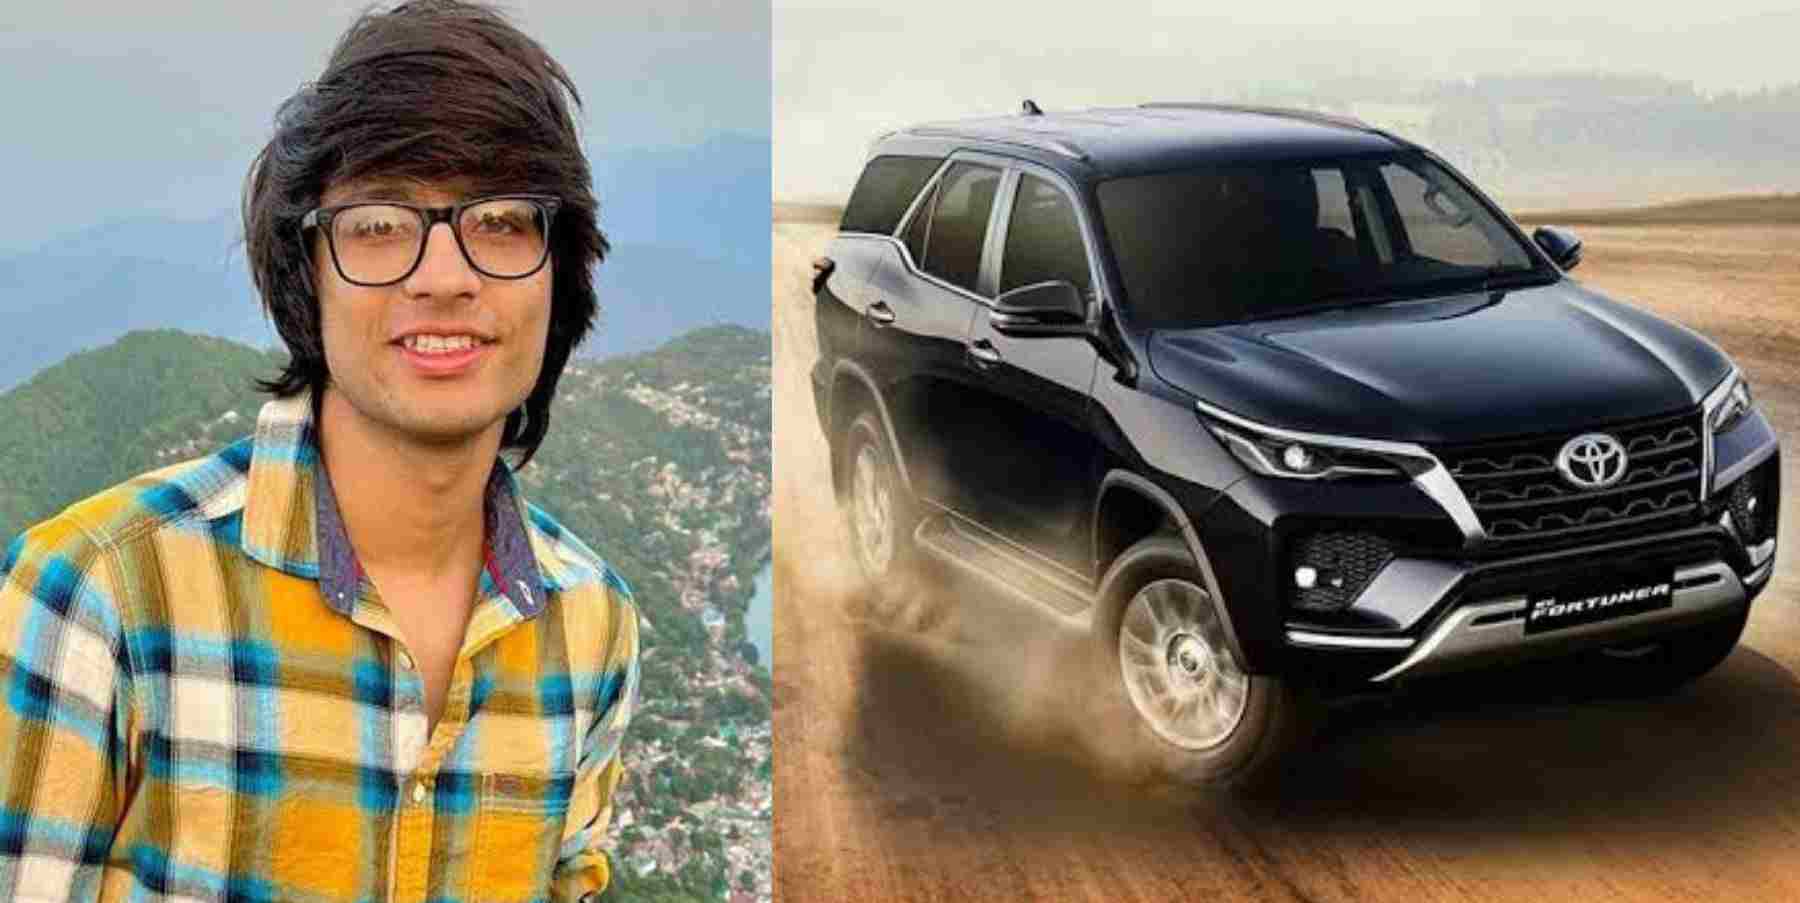 Uttarakhand news: Sourav Joshi journey from bicycle to fortuner, only art brightened his luck know vlogs income. sourav joshi vlogs income